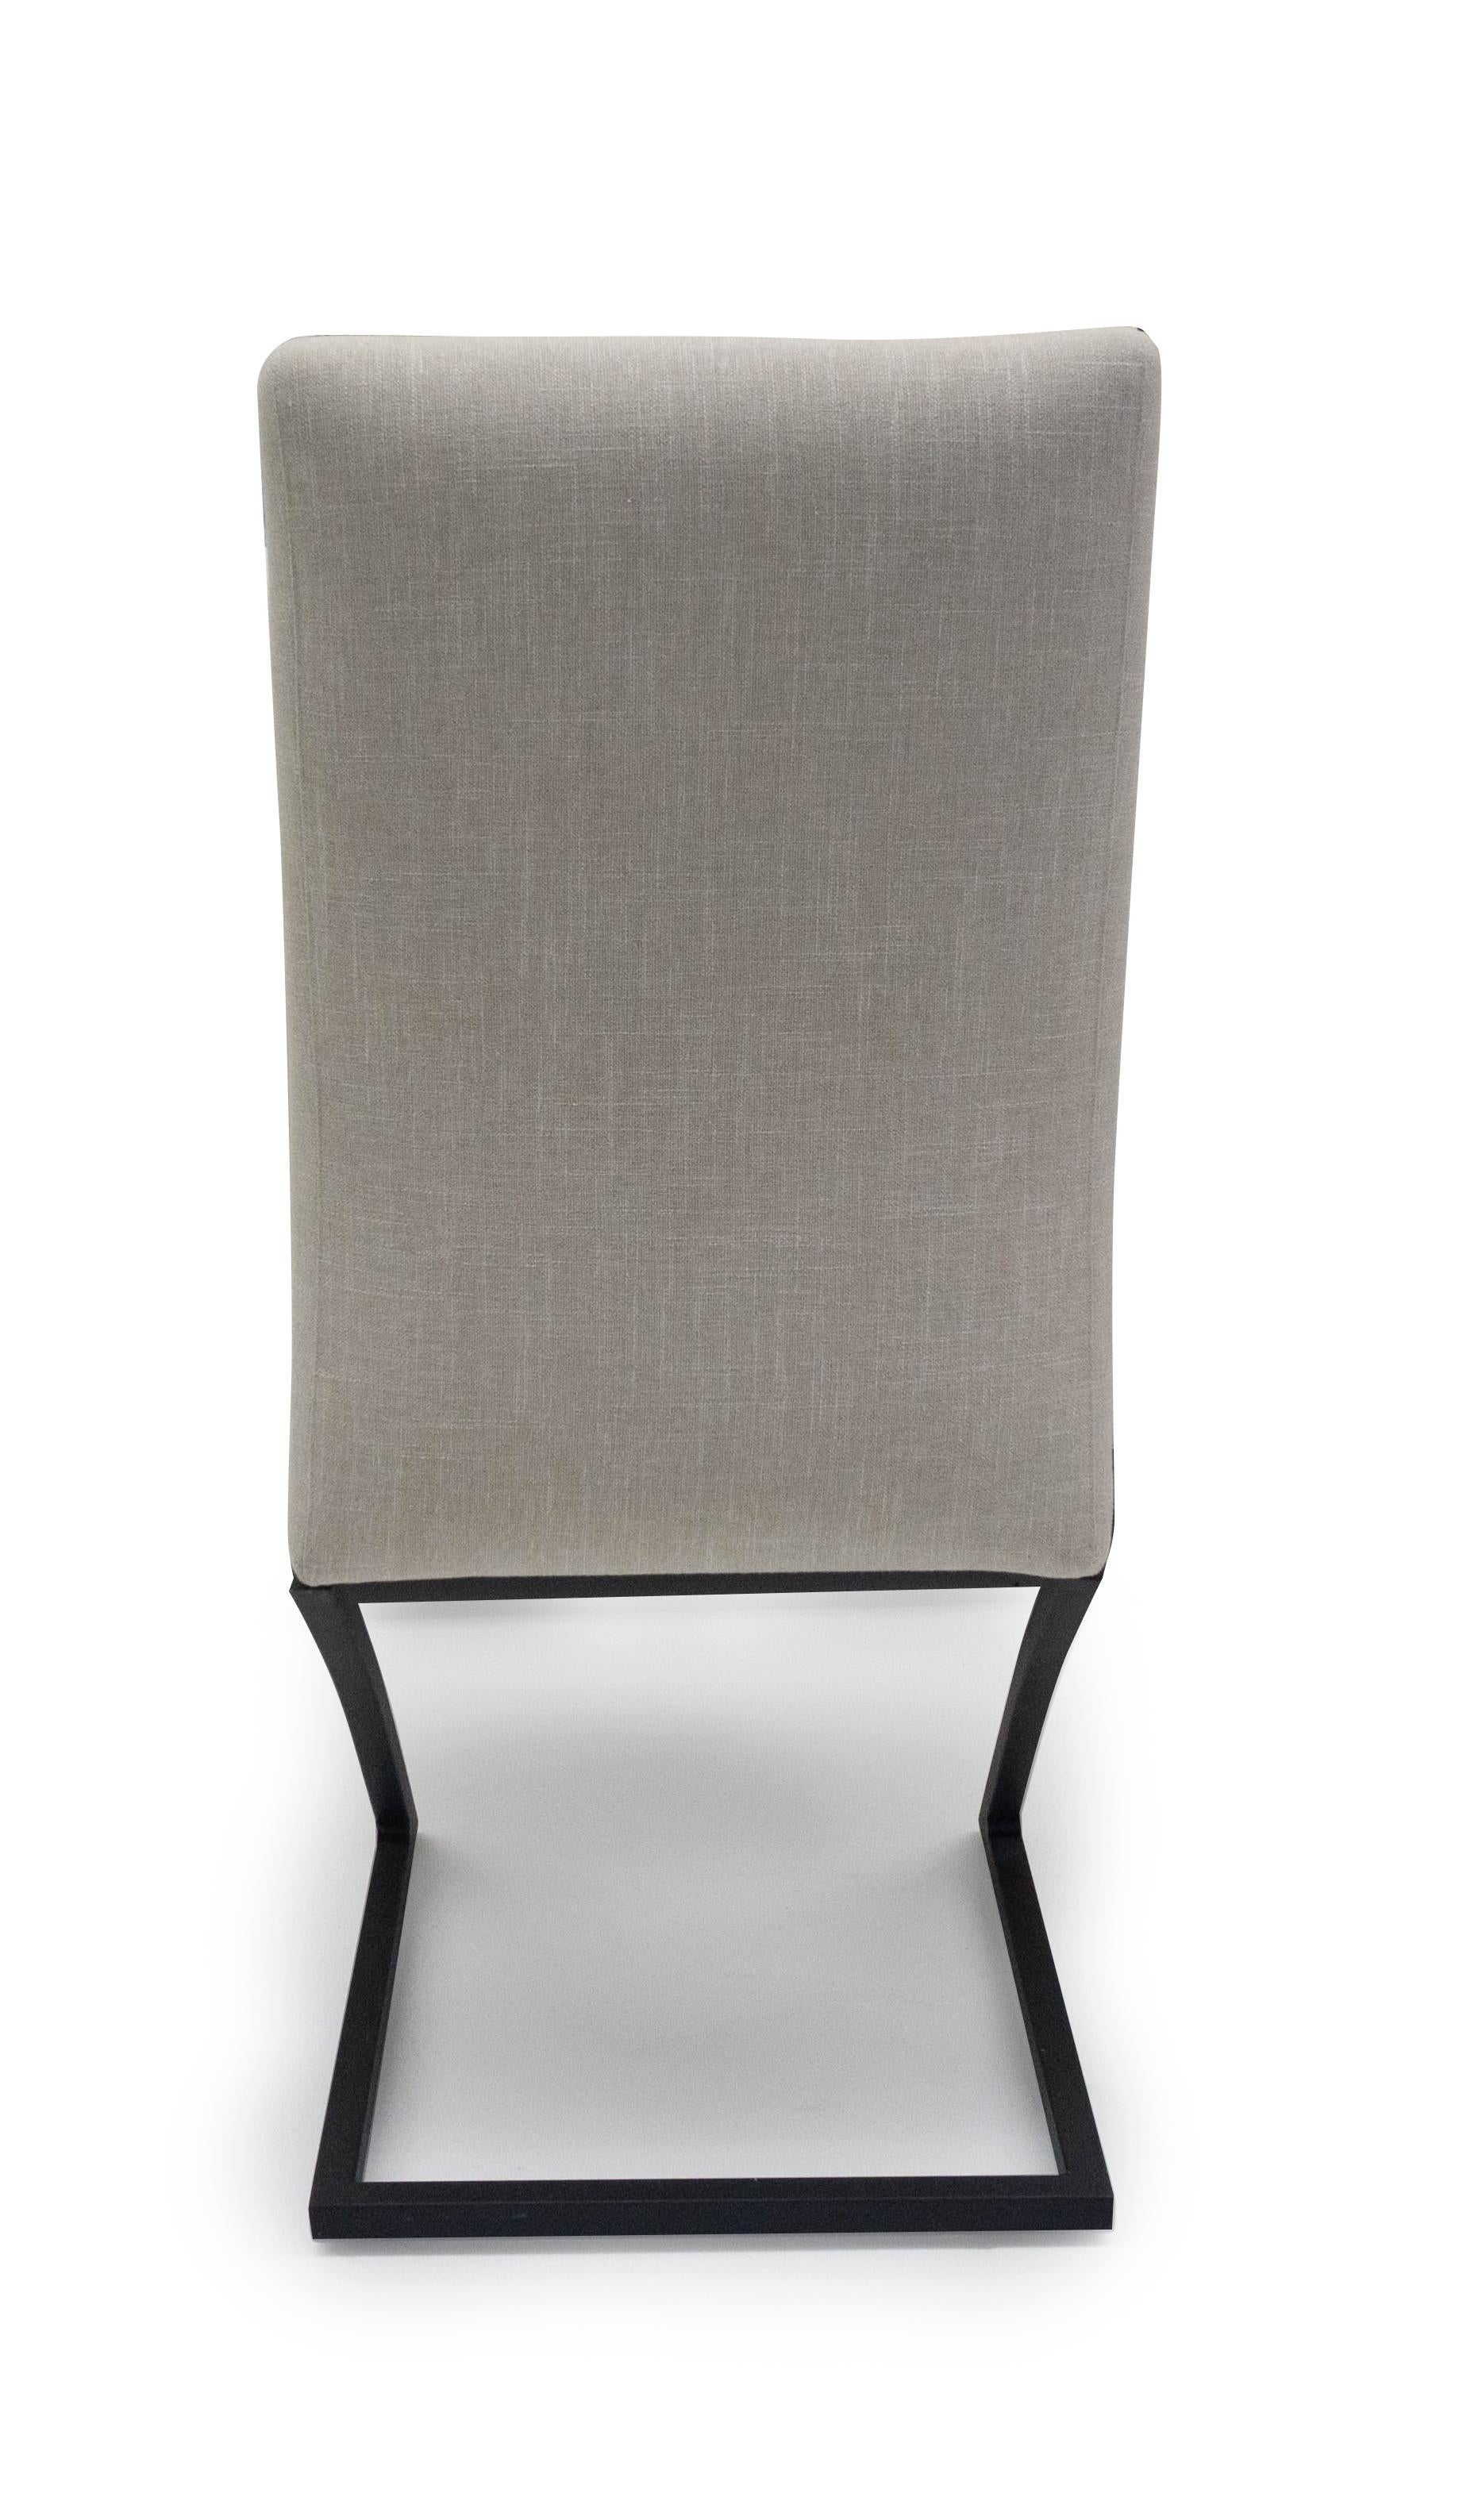 modern upholstered dining chairs